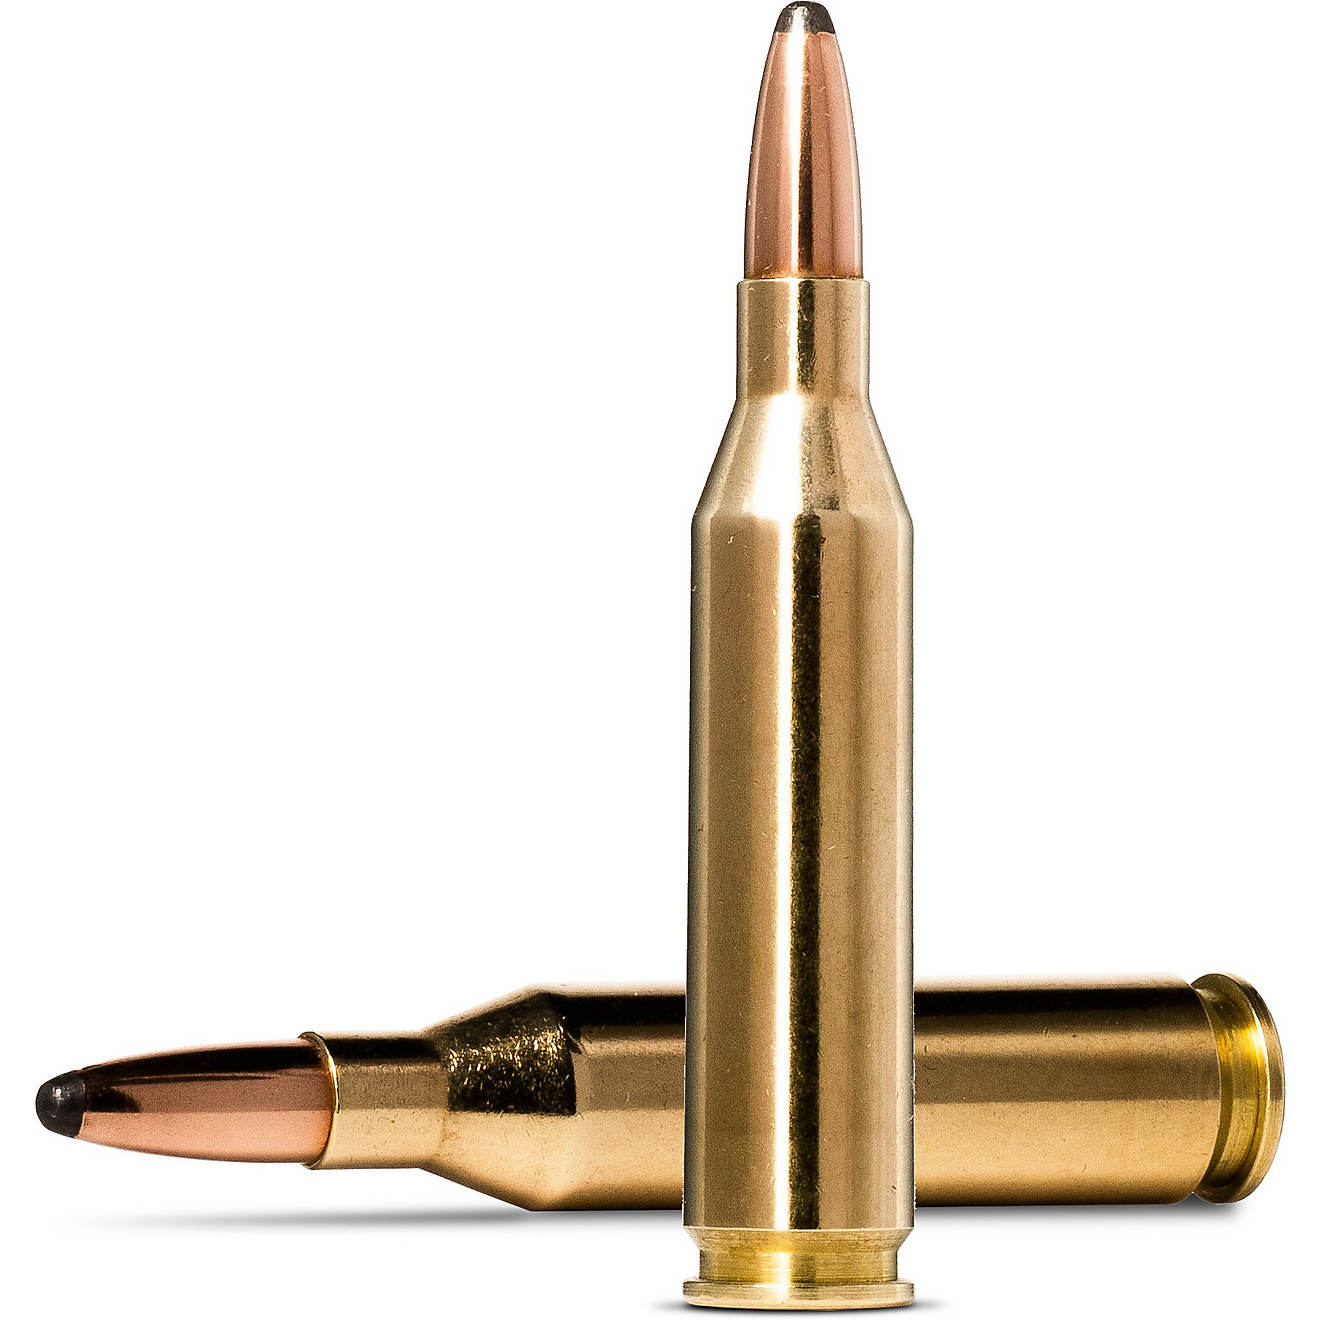 Norma USA Whitetail .243 Winchester 100-Grain Centerfire Rifle Ammunition - 20 Rounds                                            - view number 1